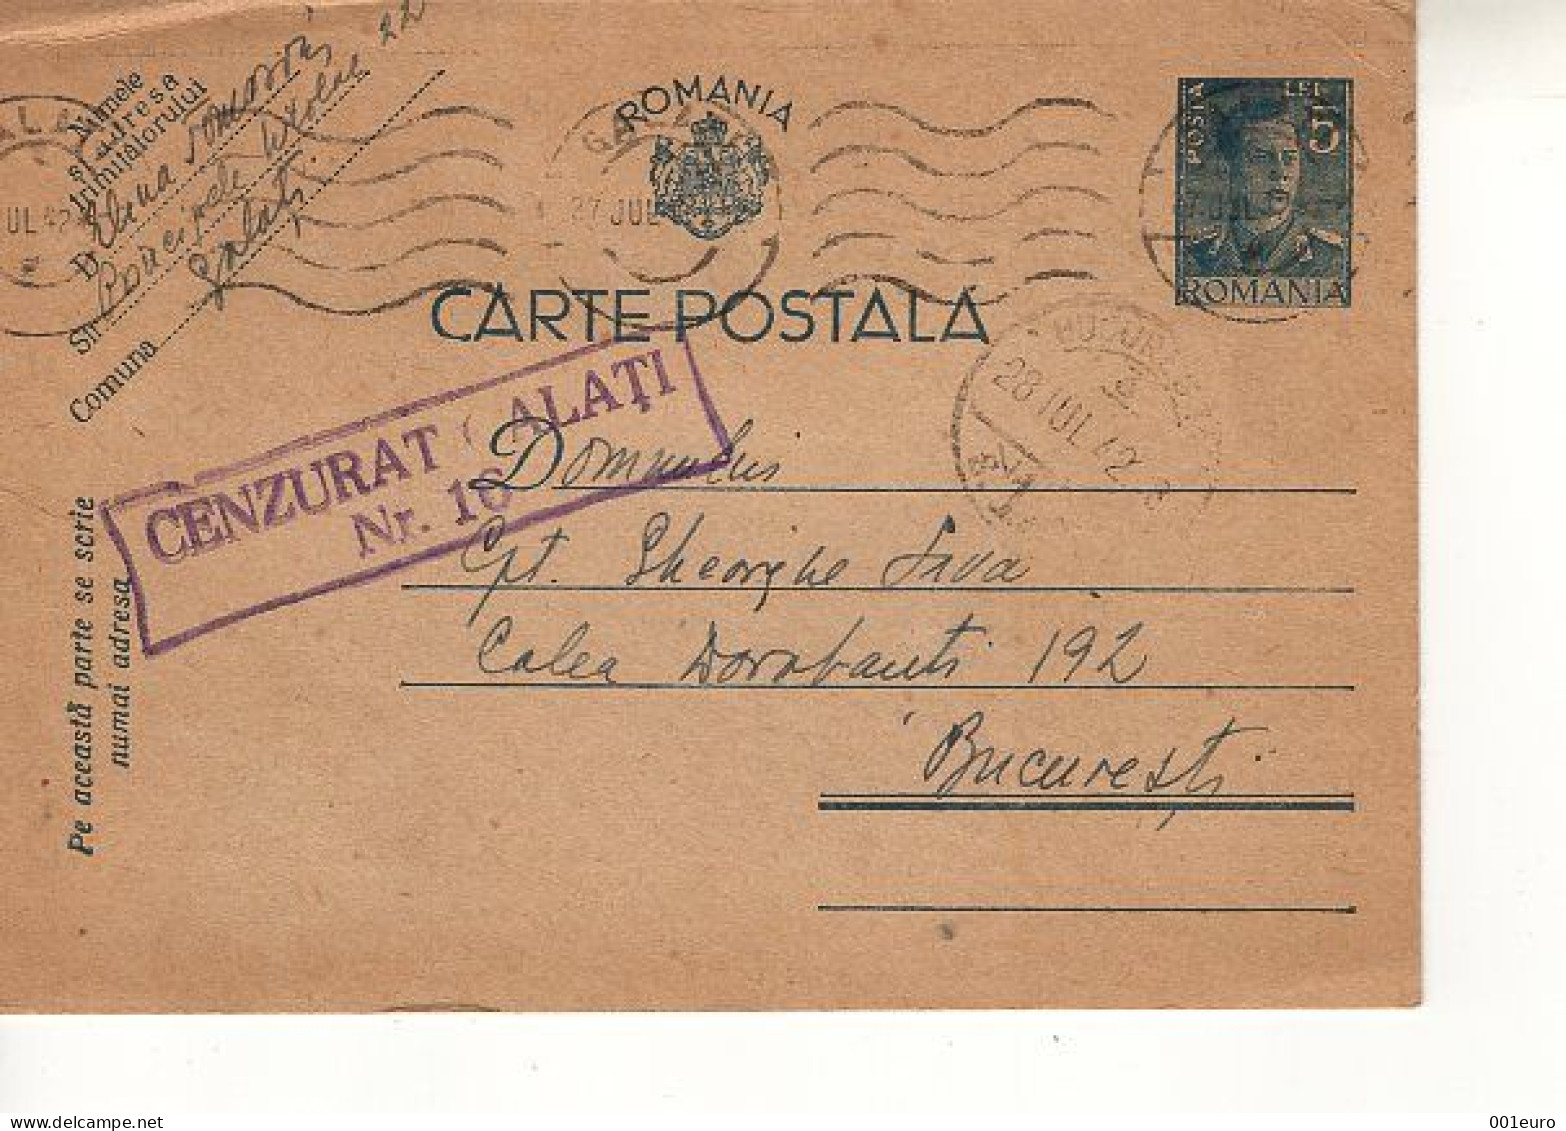 ROMANIA 1942: CENSORED MAIL, Used Prepaid Postal Stationery Card - Registered Shipping! - Enteros Postales